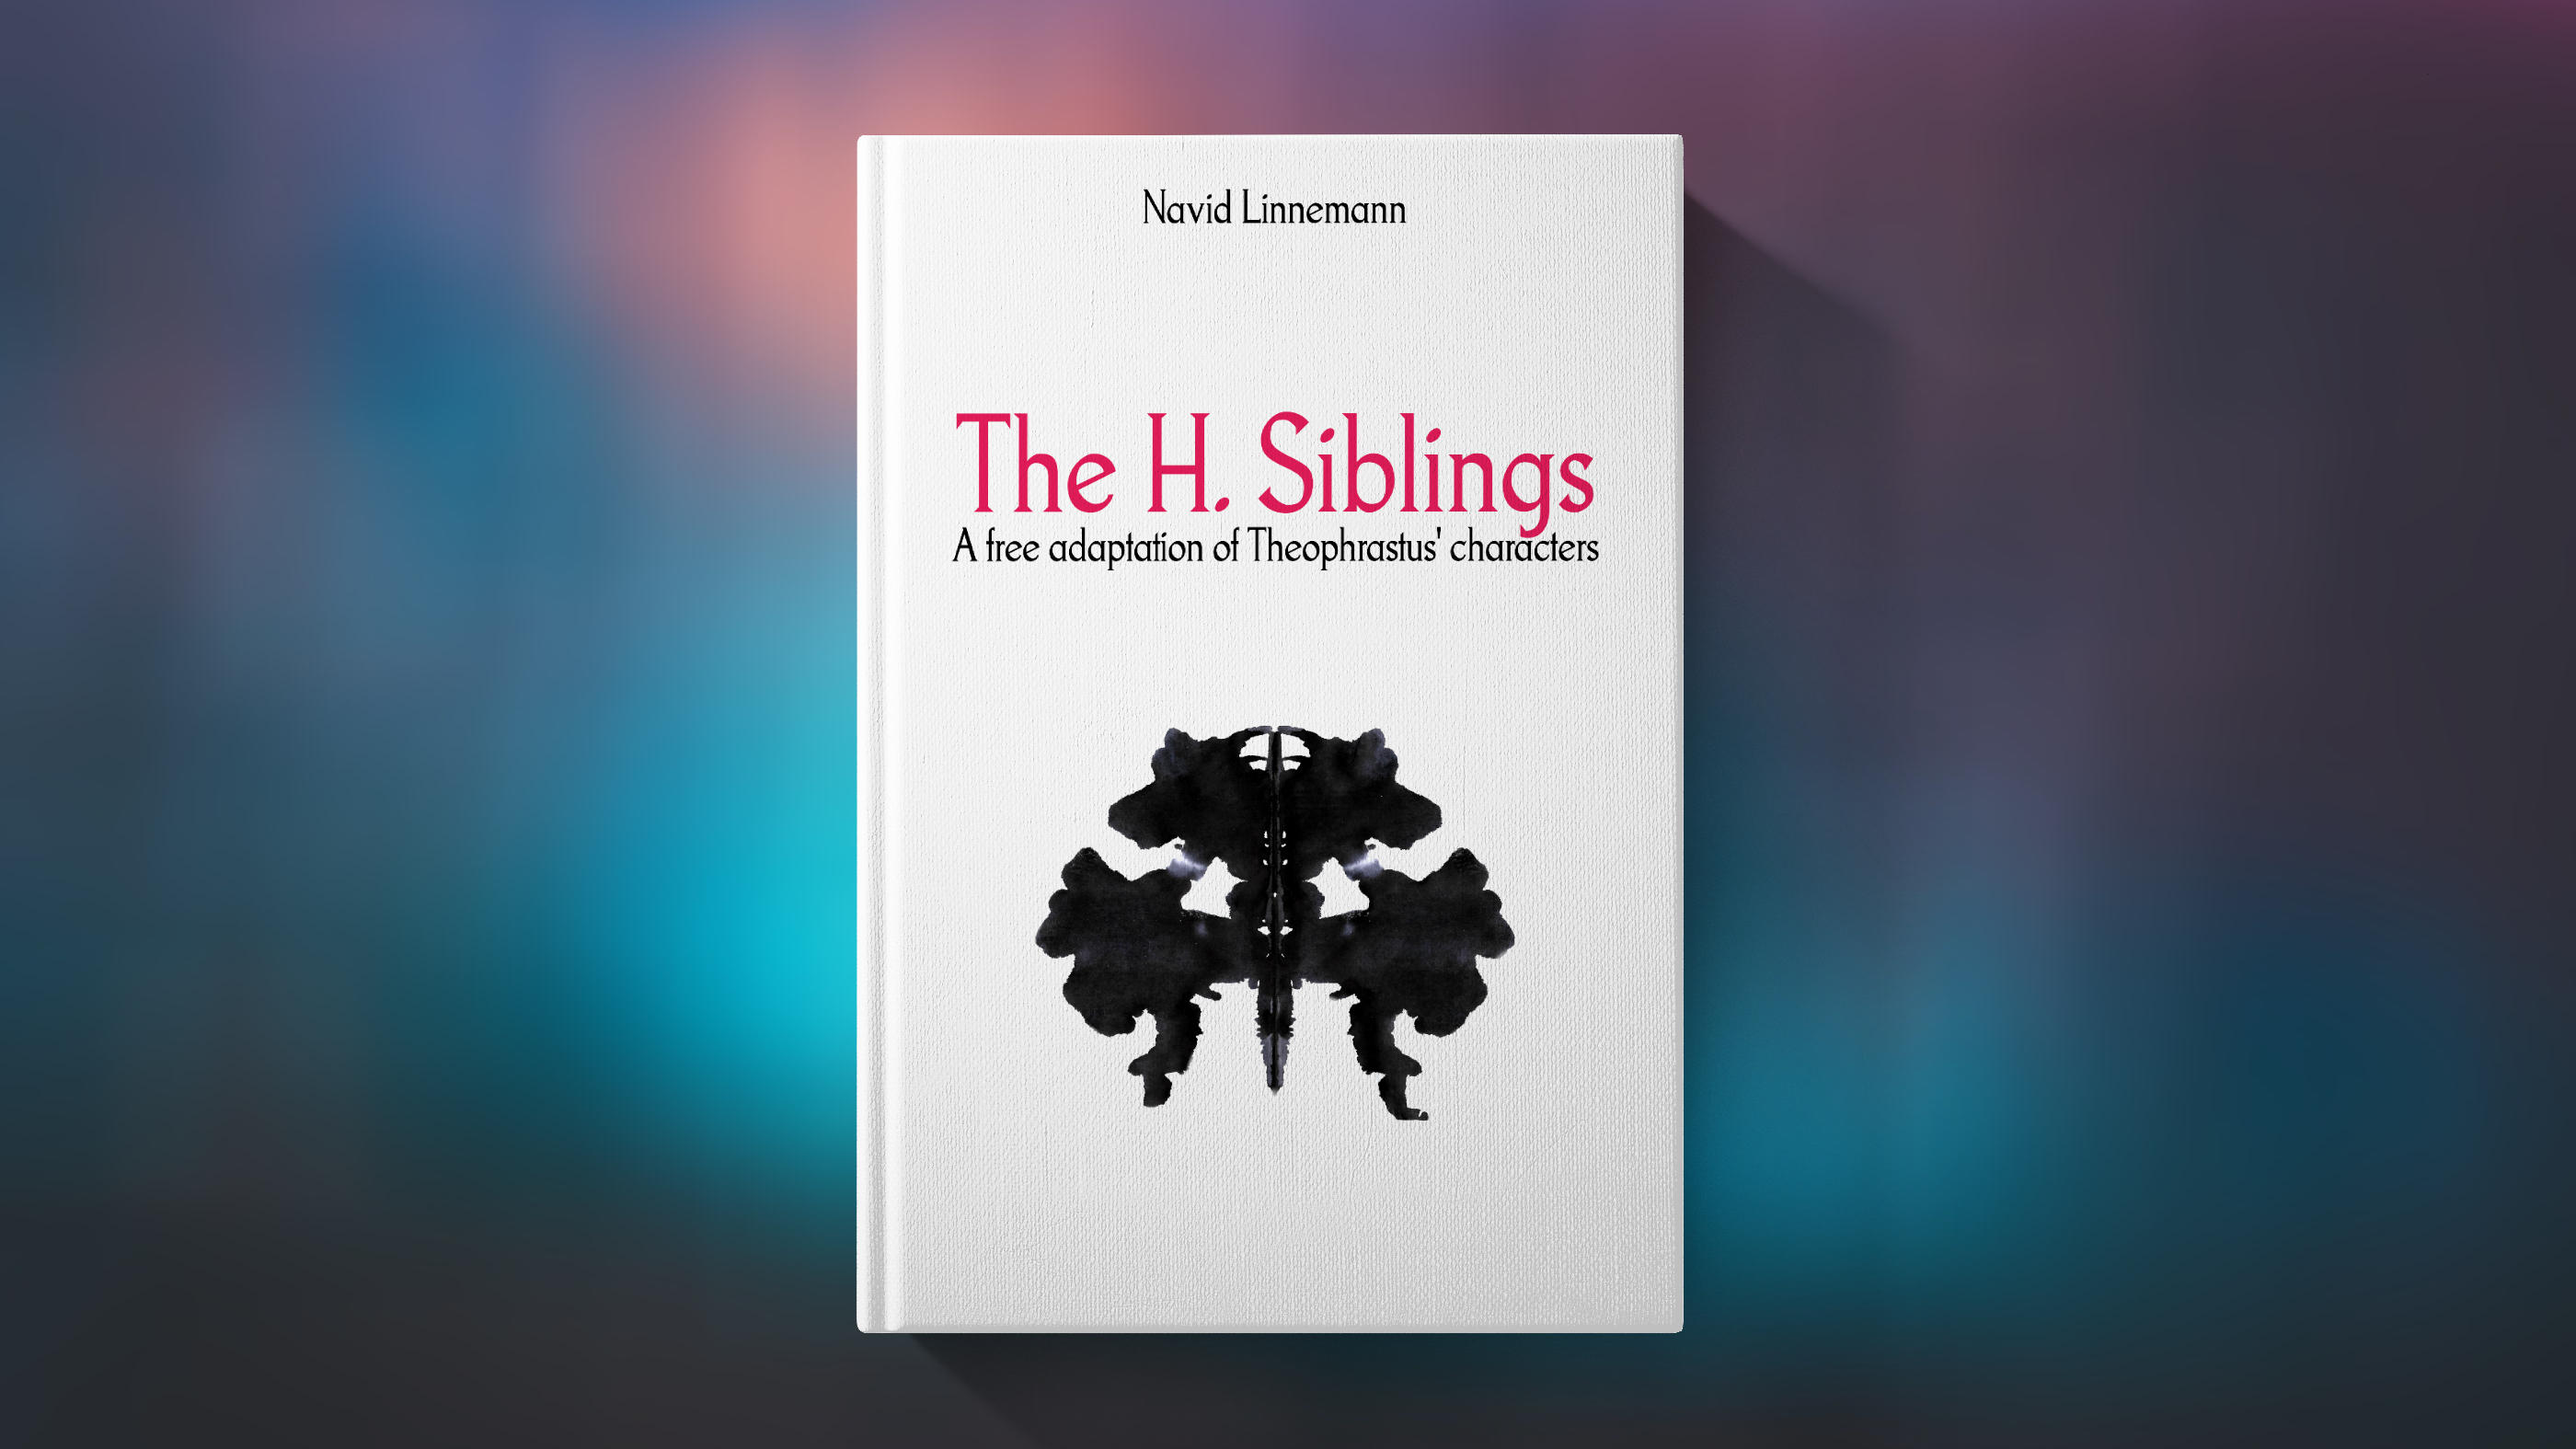 Mockup for the book The H. Siblings by Navid Linnemann book cover